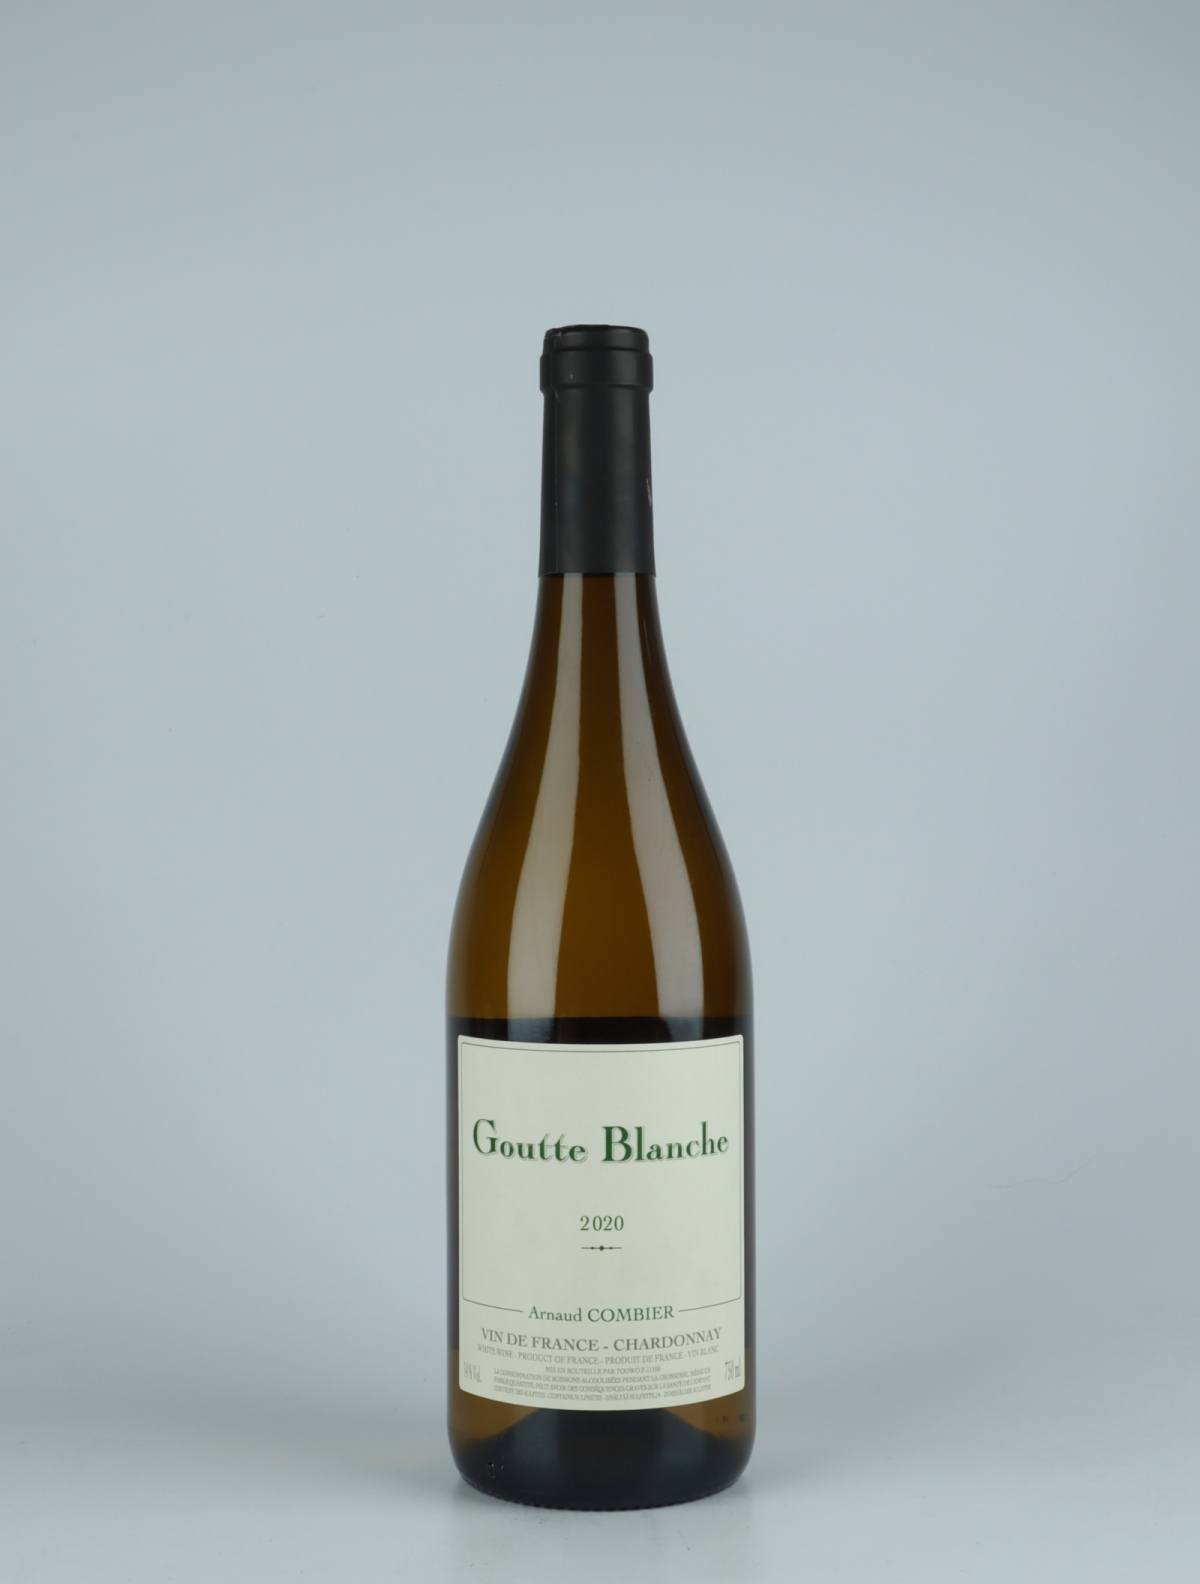 A bottle 2020 Goutte Blanche White wine from Arnaud Combier, Beaujolais in France